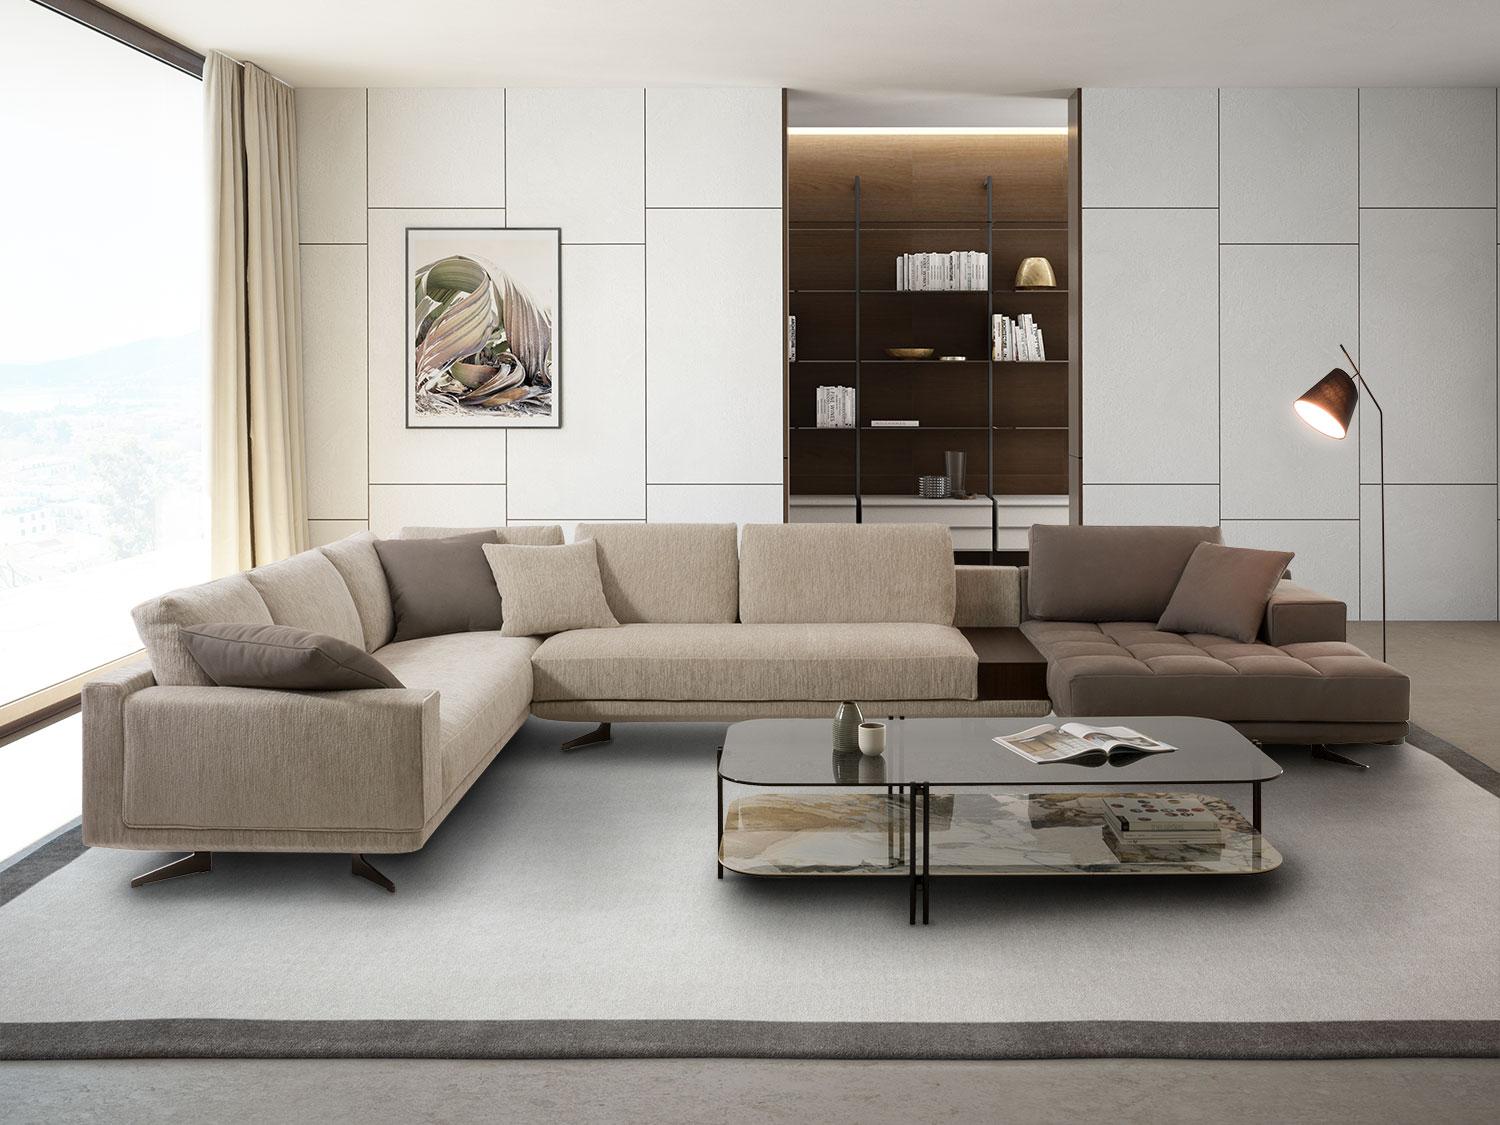 Antibes modern sectional sofa with tall legs | DIOTTI.COM